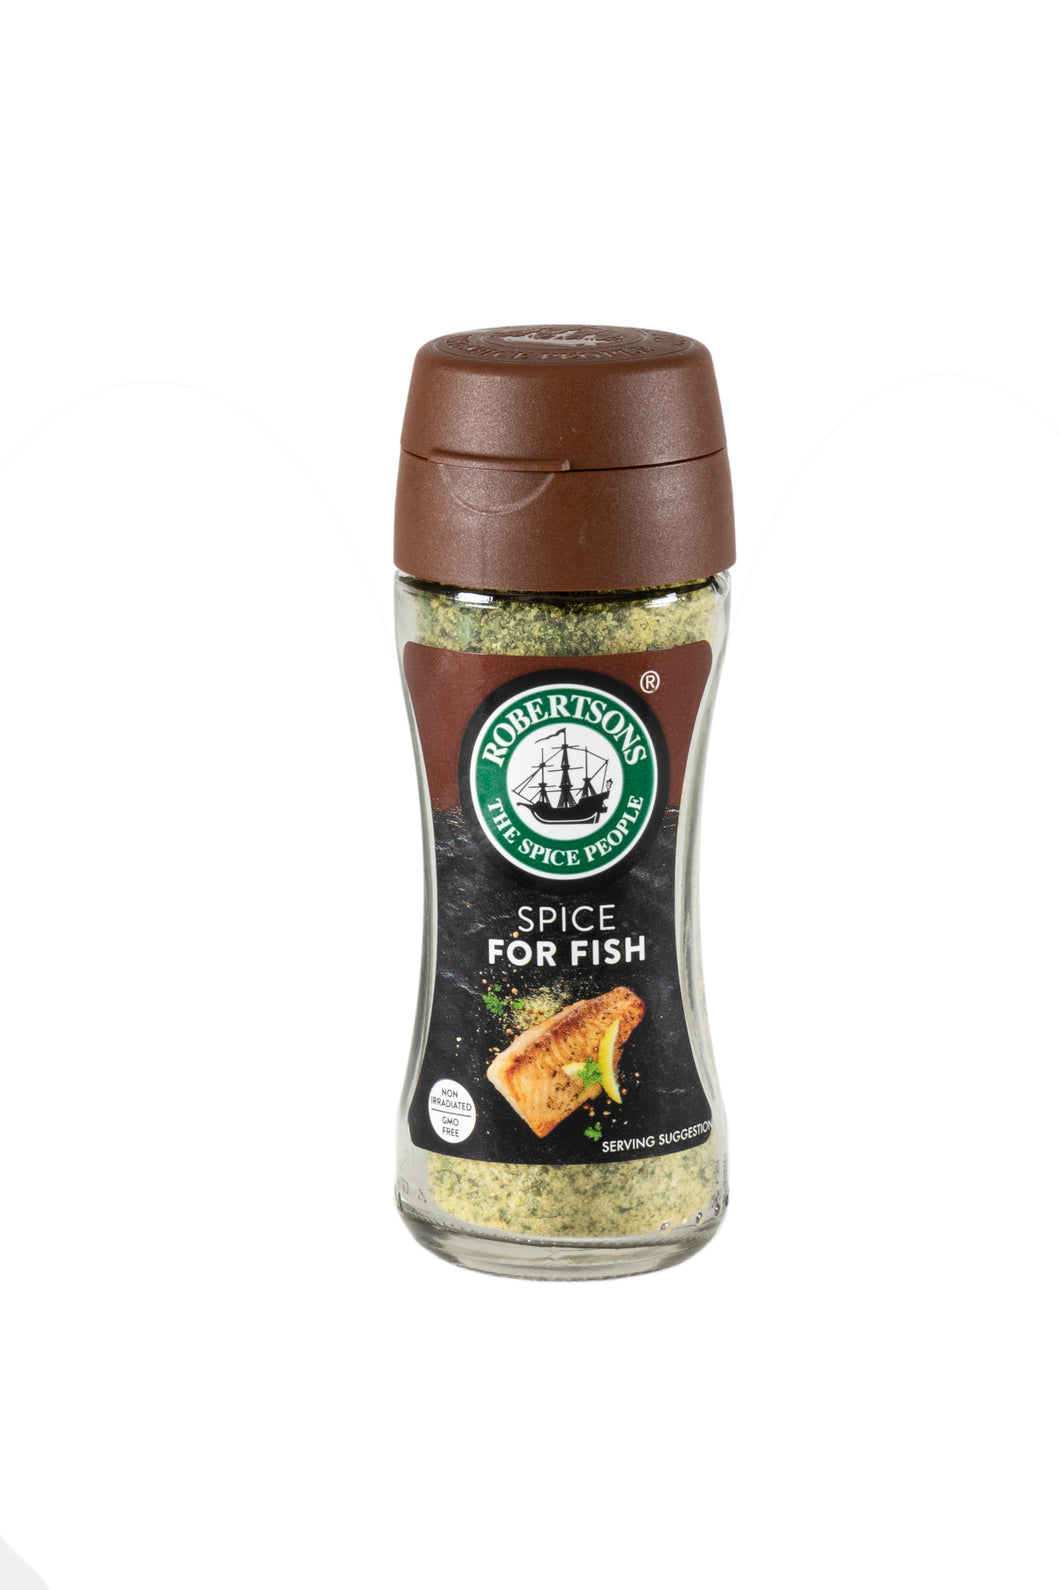 Spice for Fish